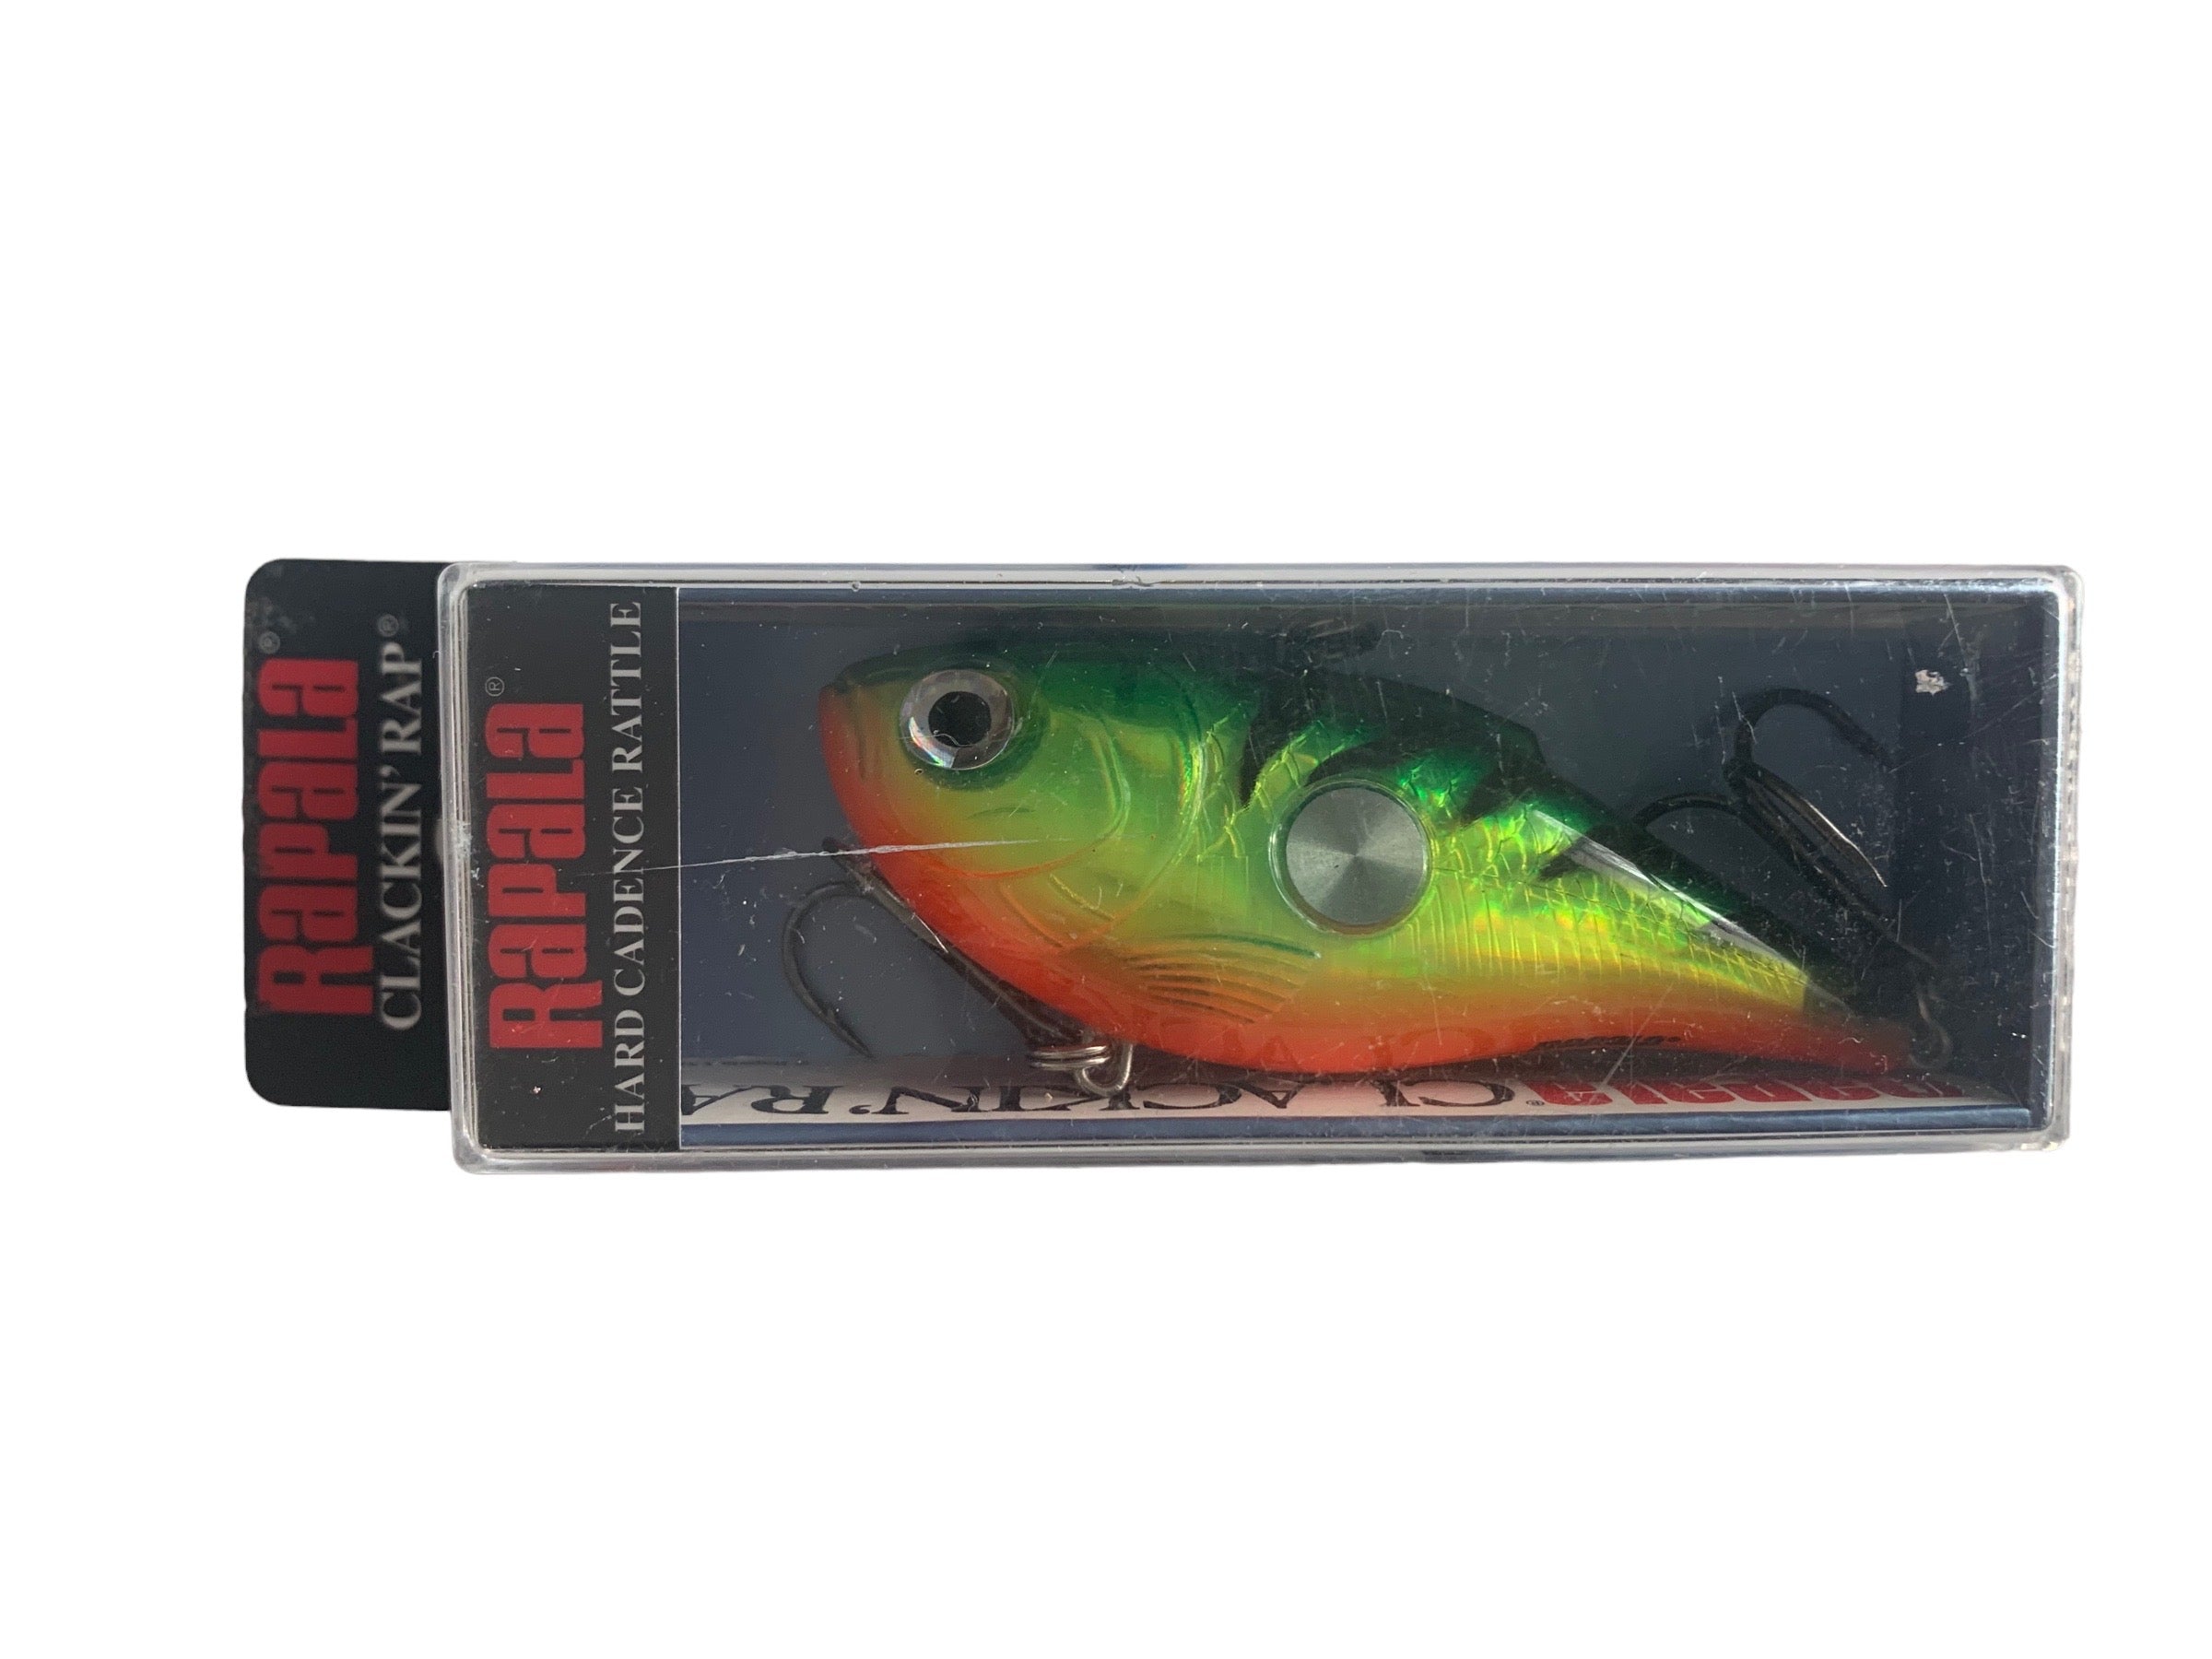 RAPALA CNR-8 CLACKIN' RAP Fishing Lure • FIRE TIGER – Toad Tackle